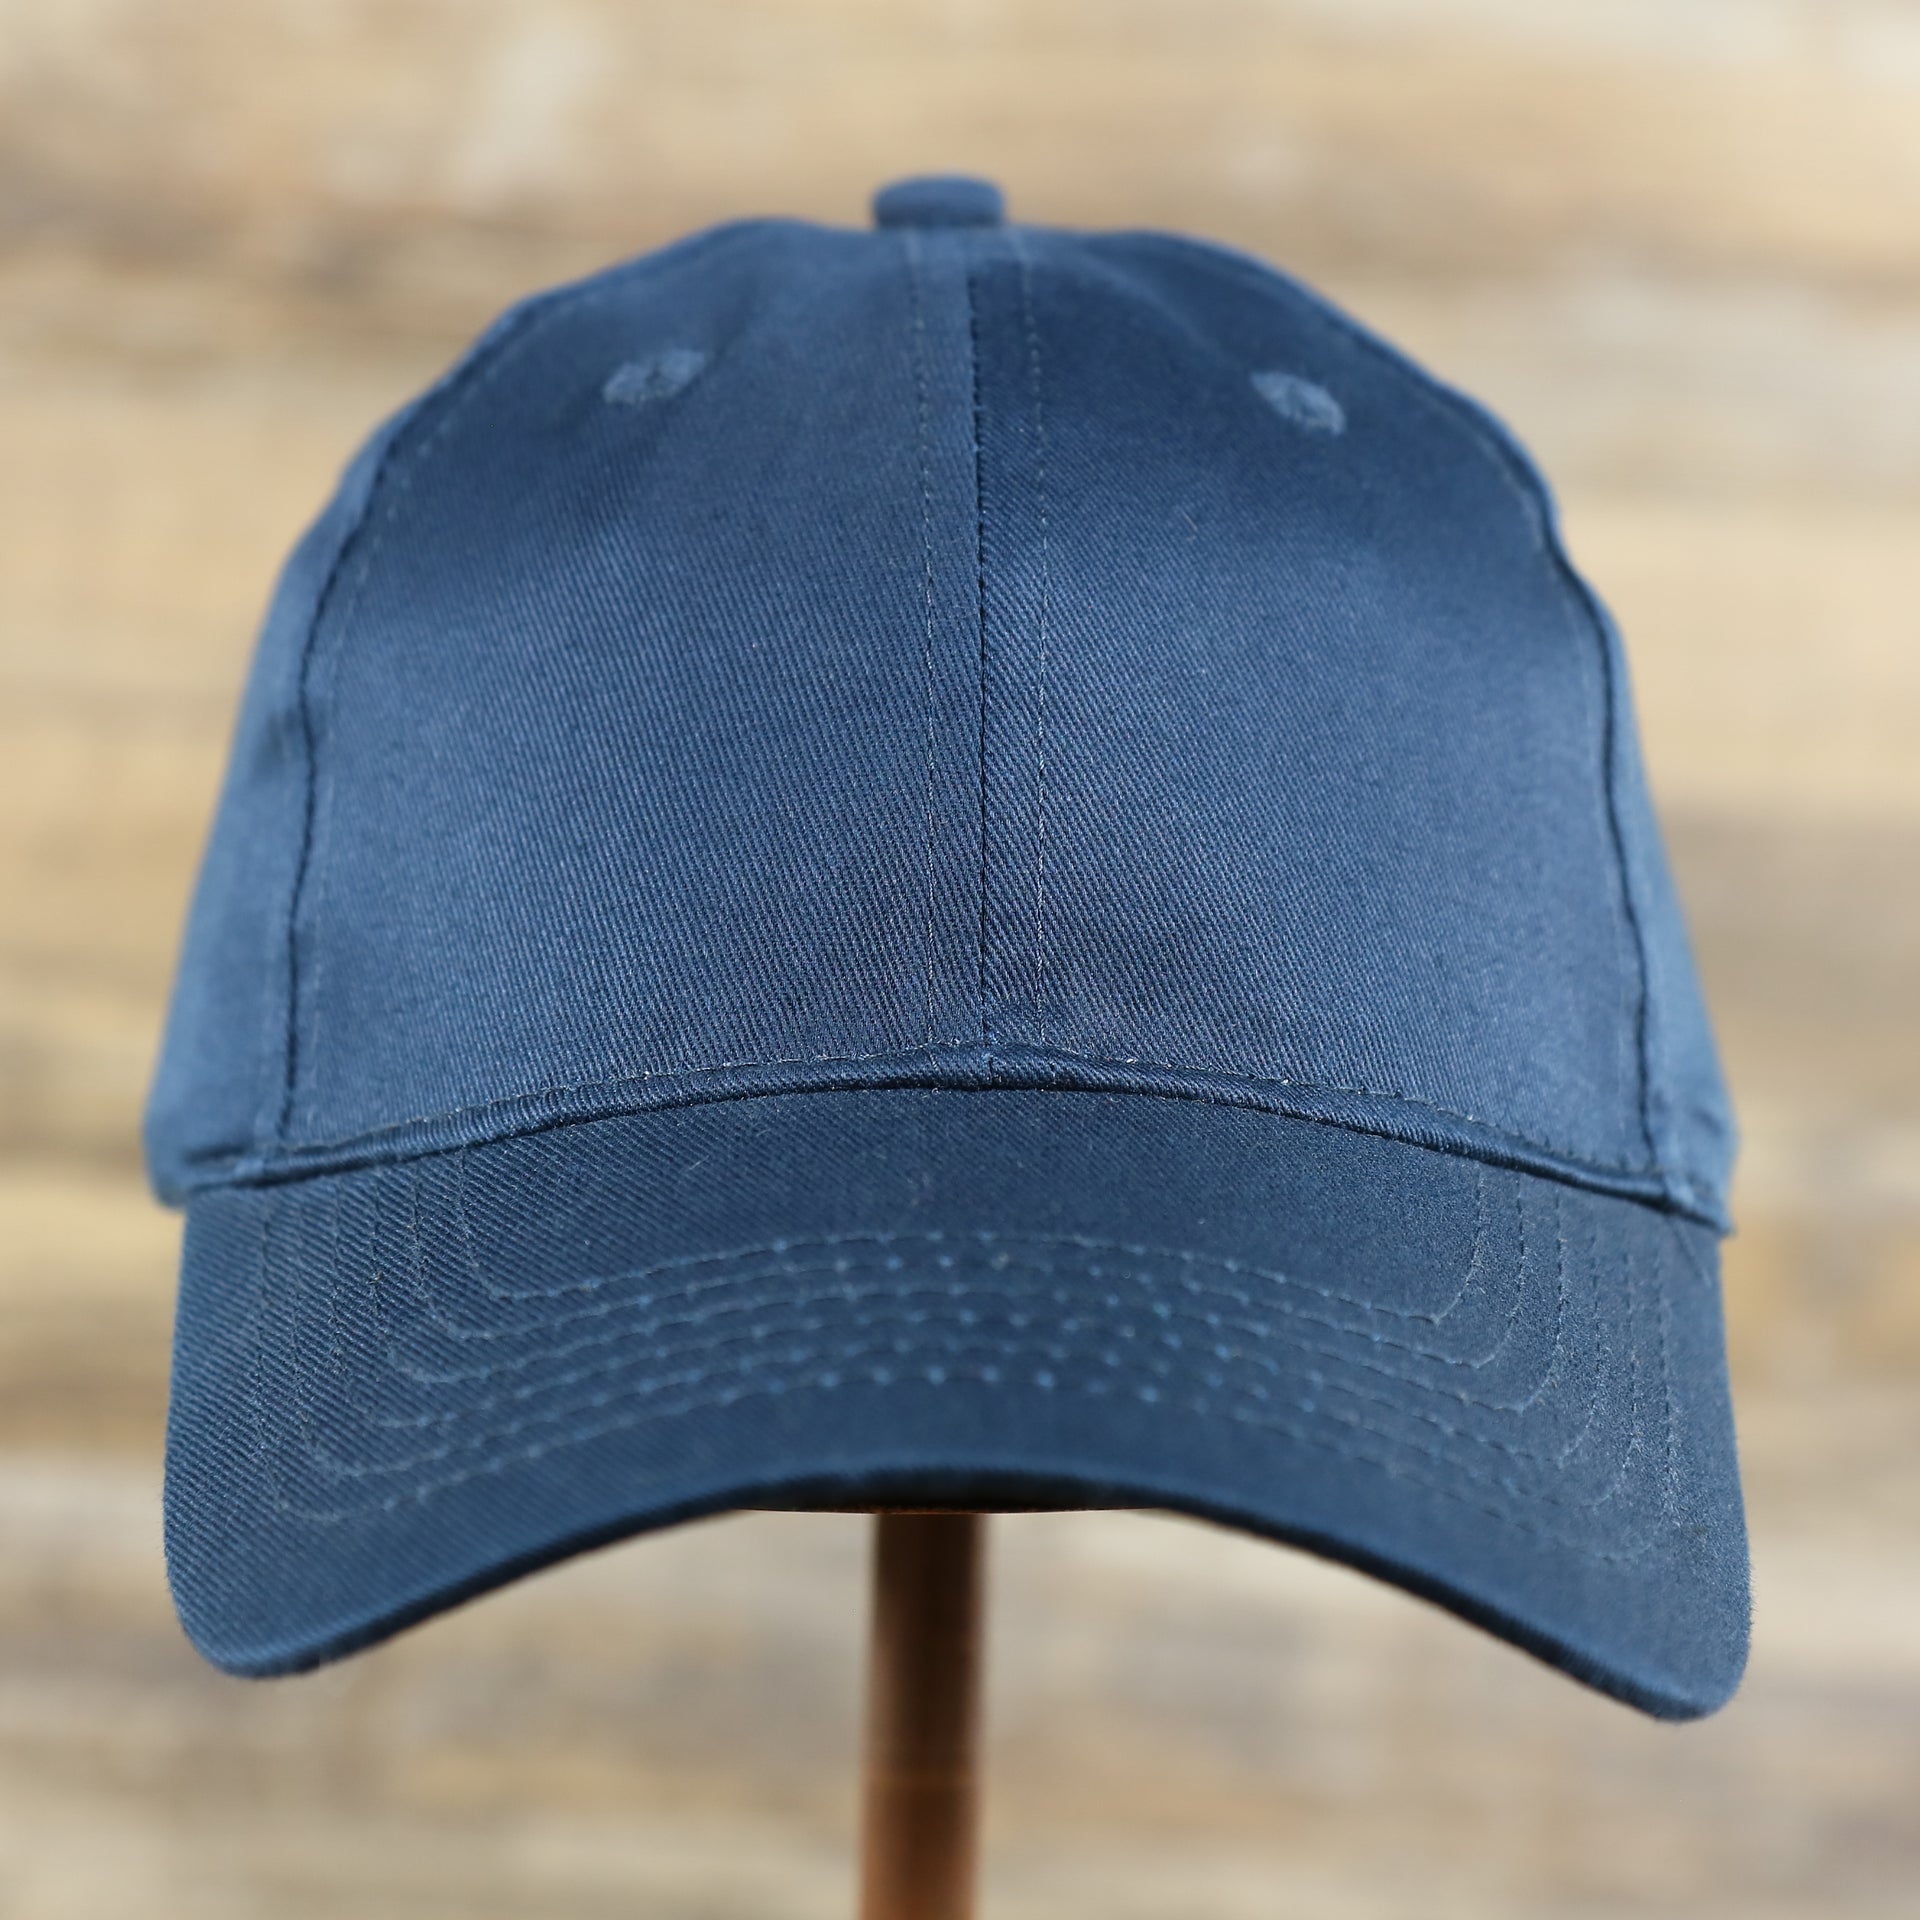 The front of the Youth Navy Blue Flat Brim Blank Baseball Hat | Kid’s Dark Blue Dad Hat